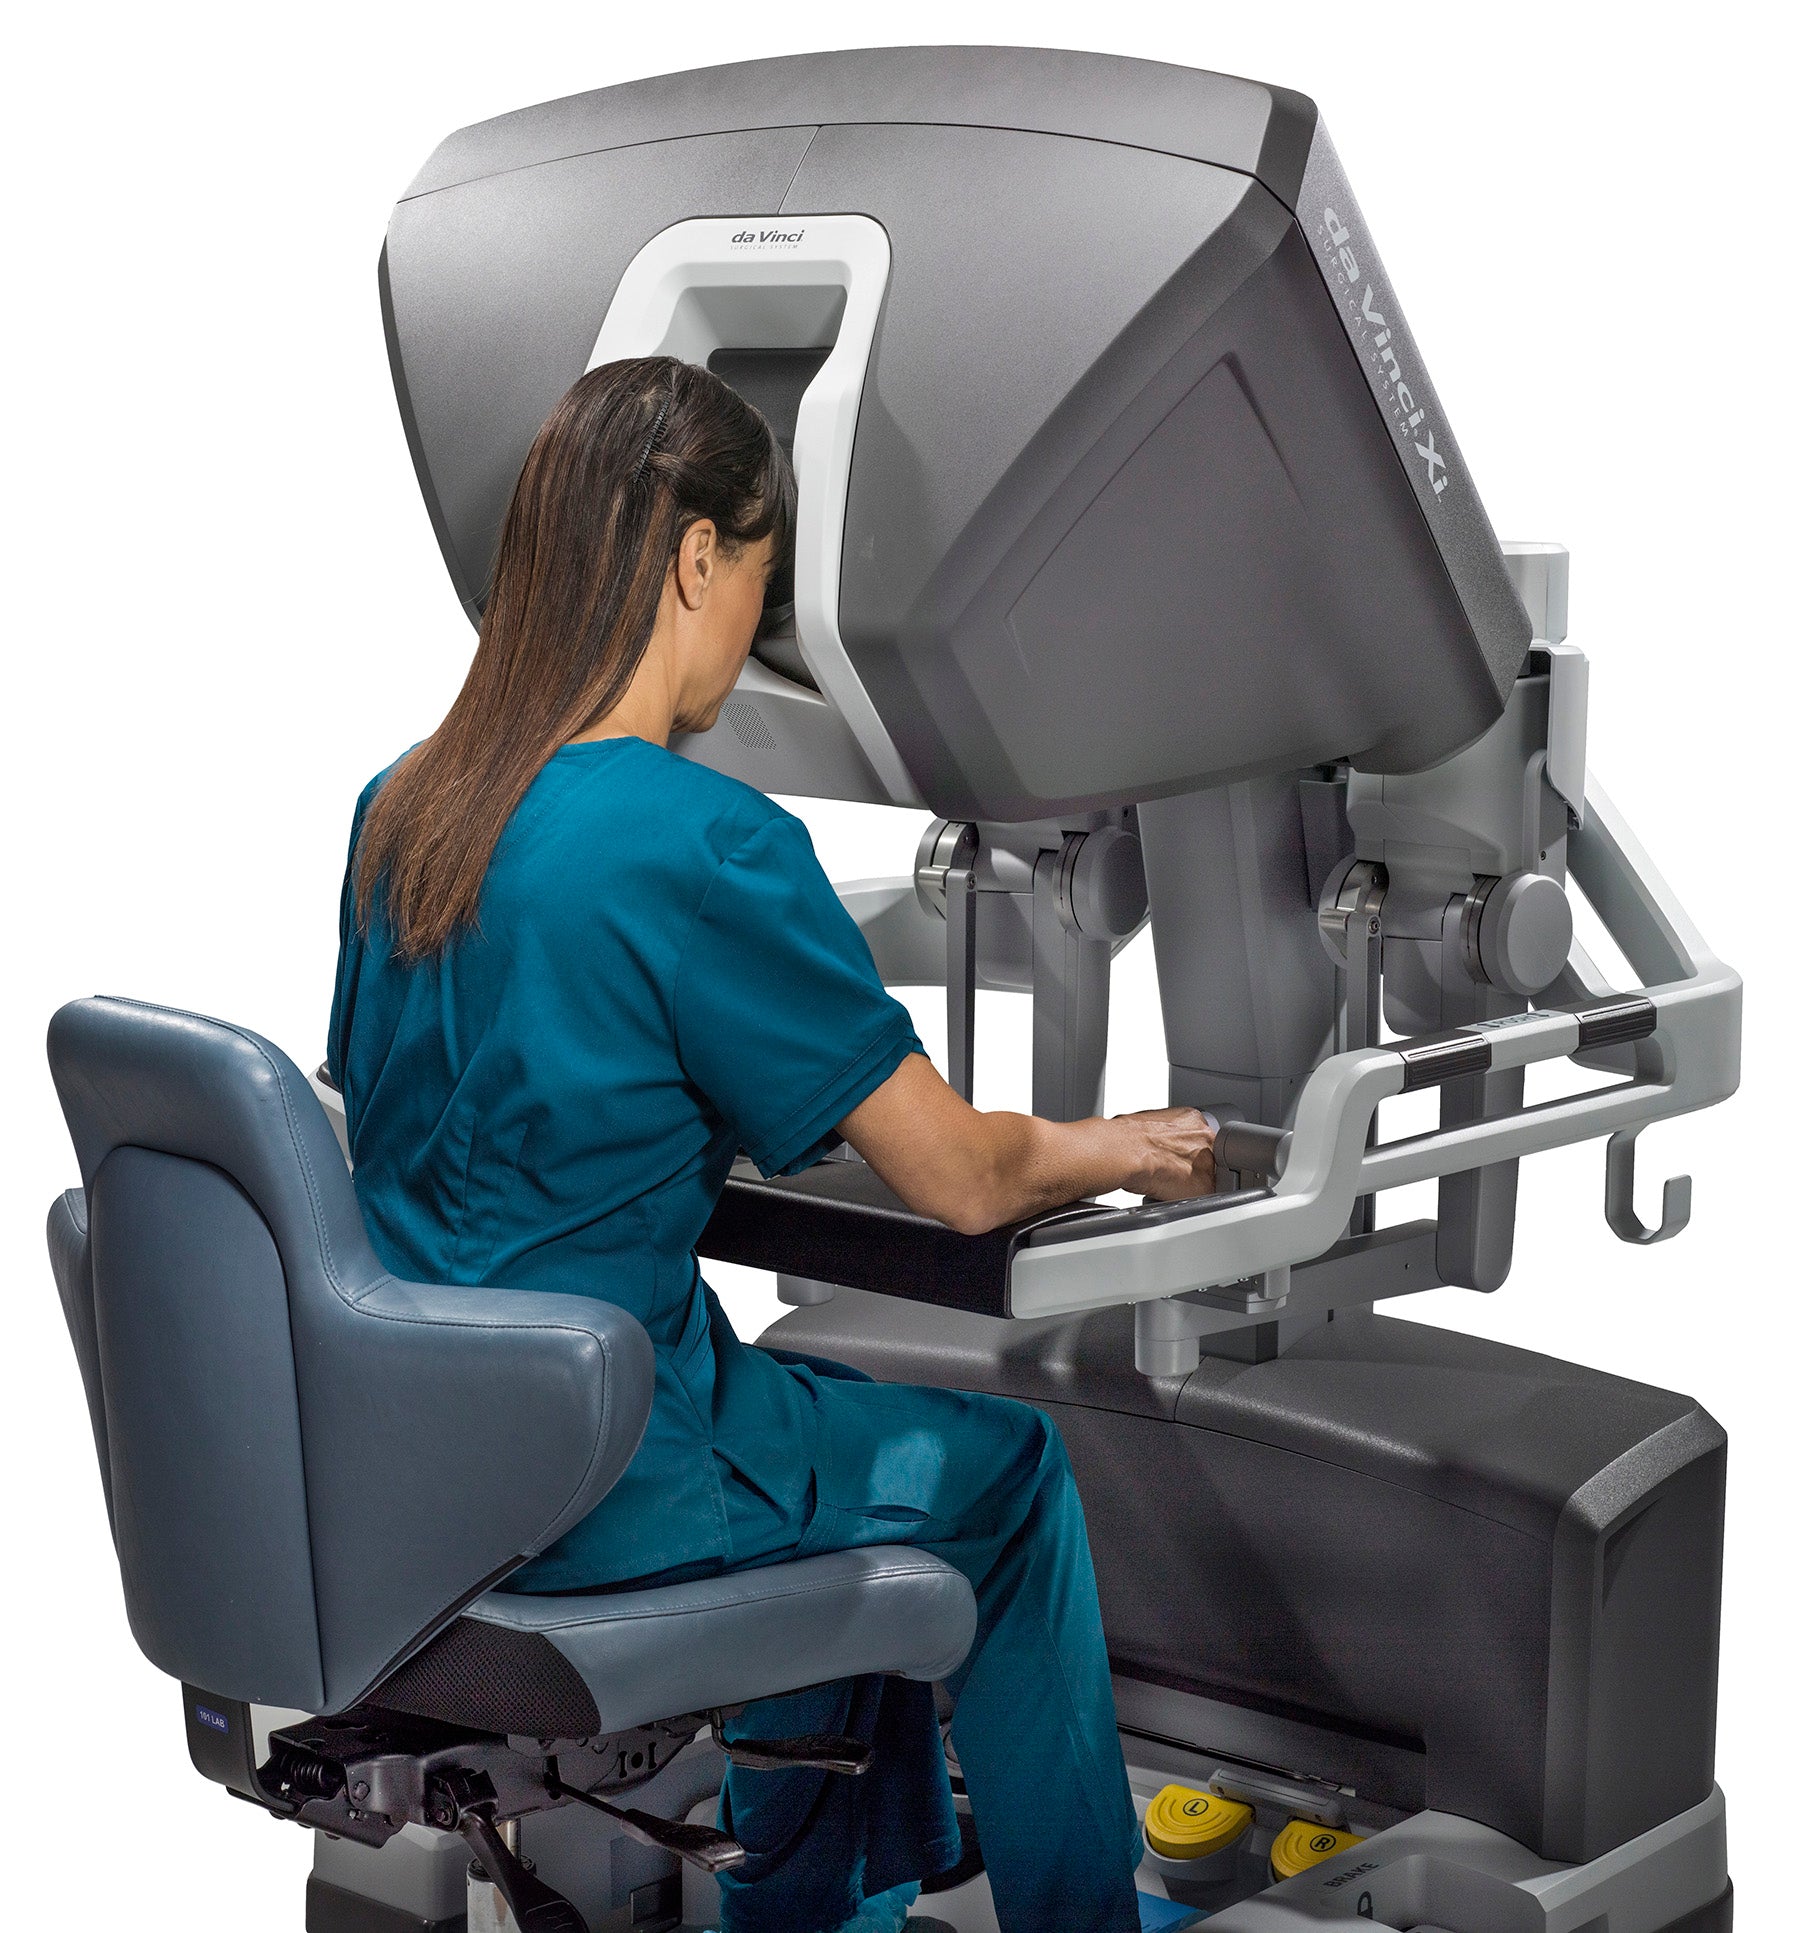 The Role of Surgeons and Surgical Teams in Da Vinci Robotic Surgery